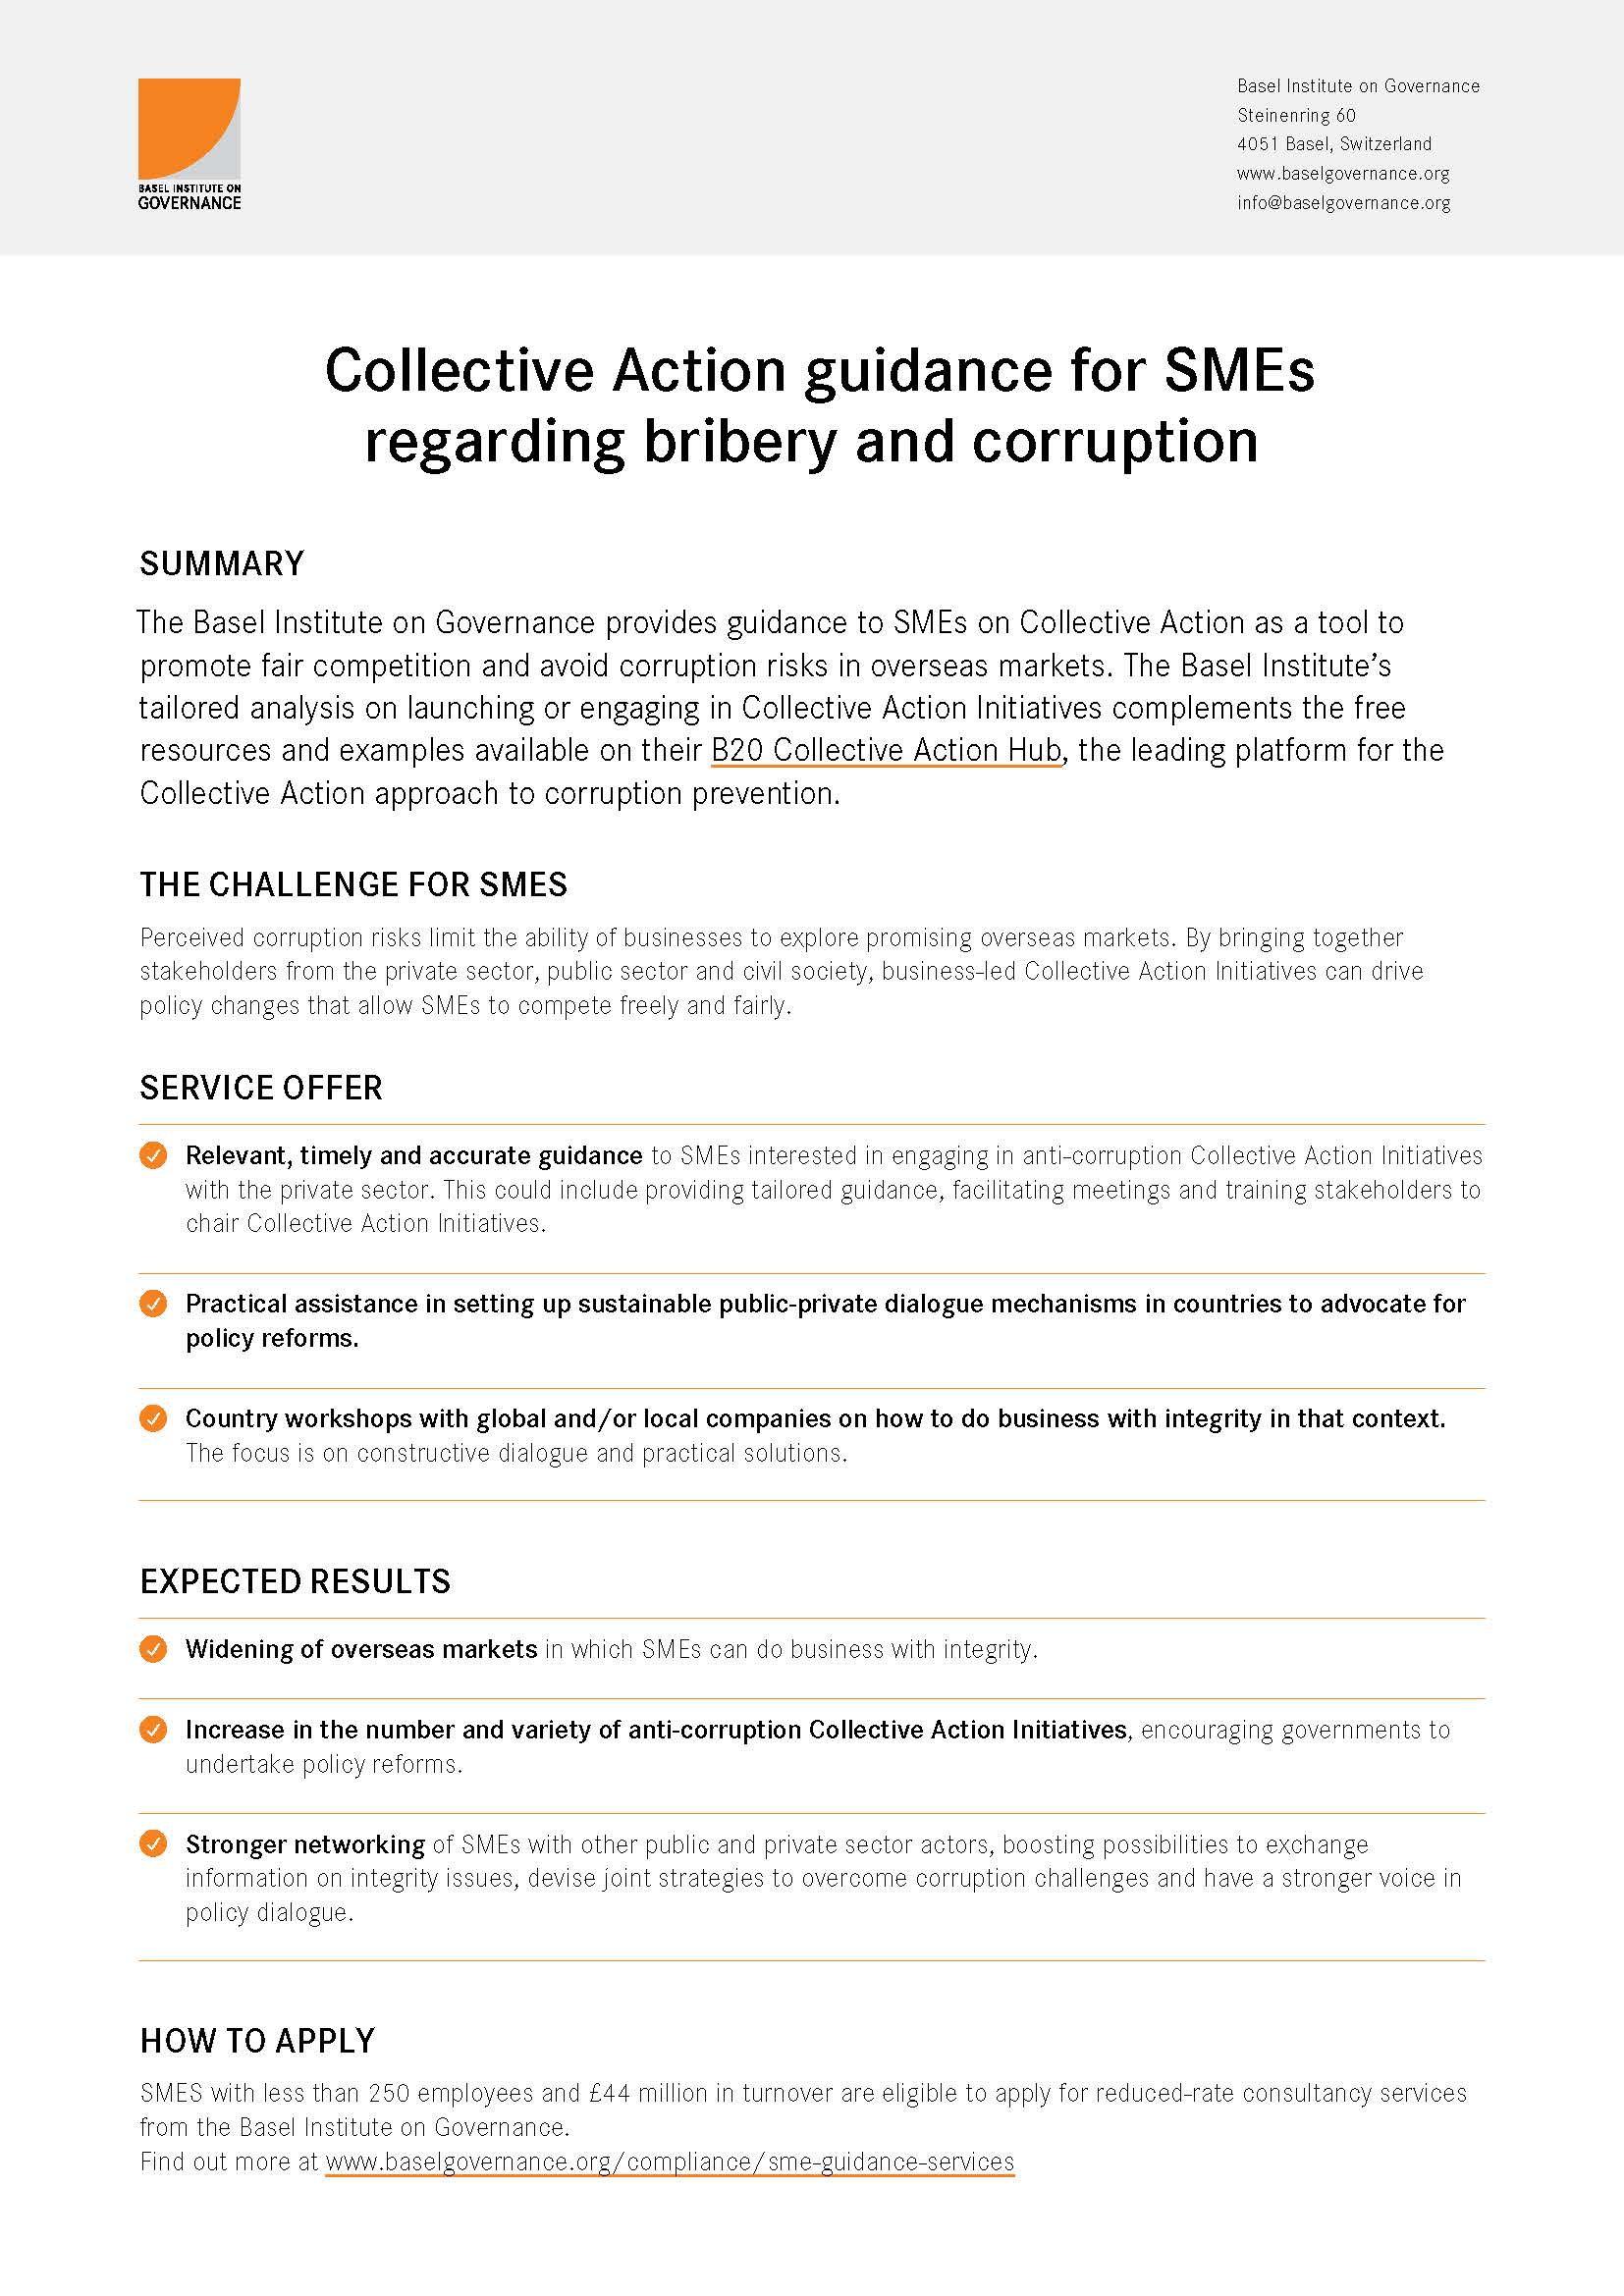 Collective Action guidance for SMEs flyer